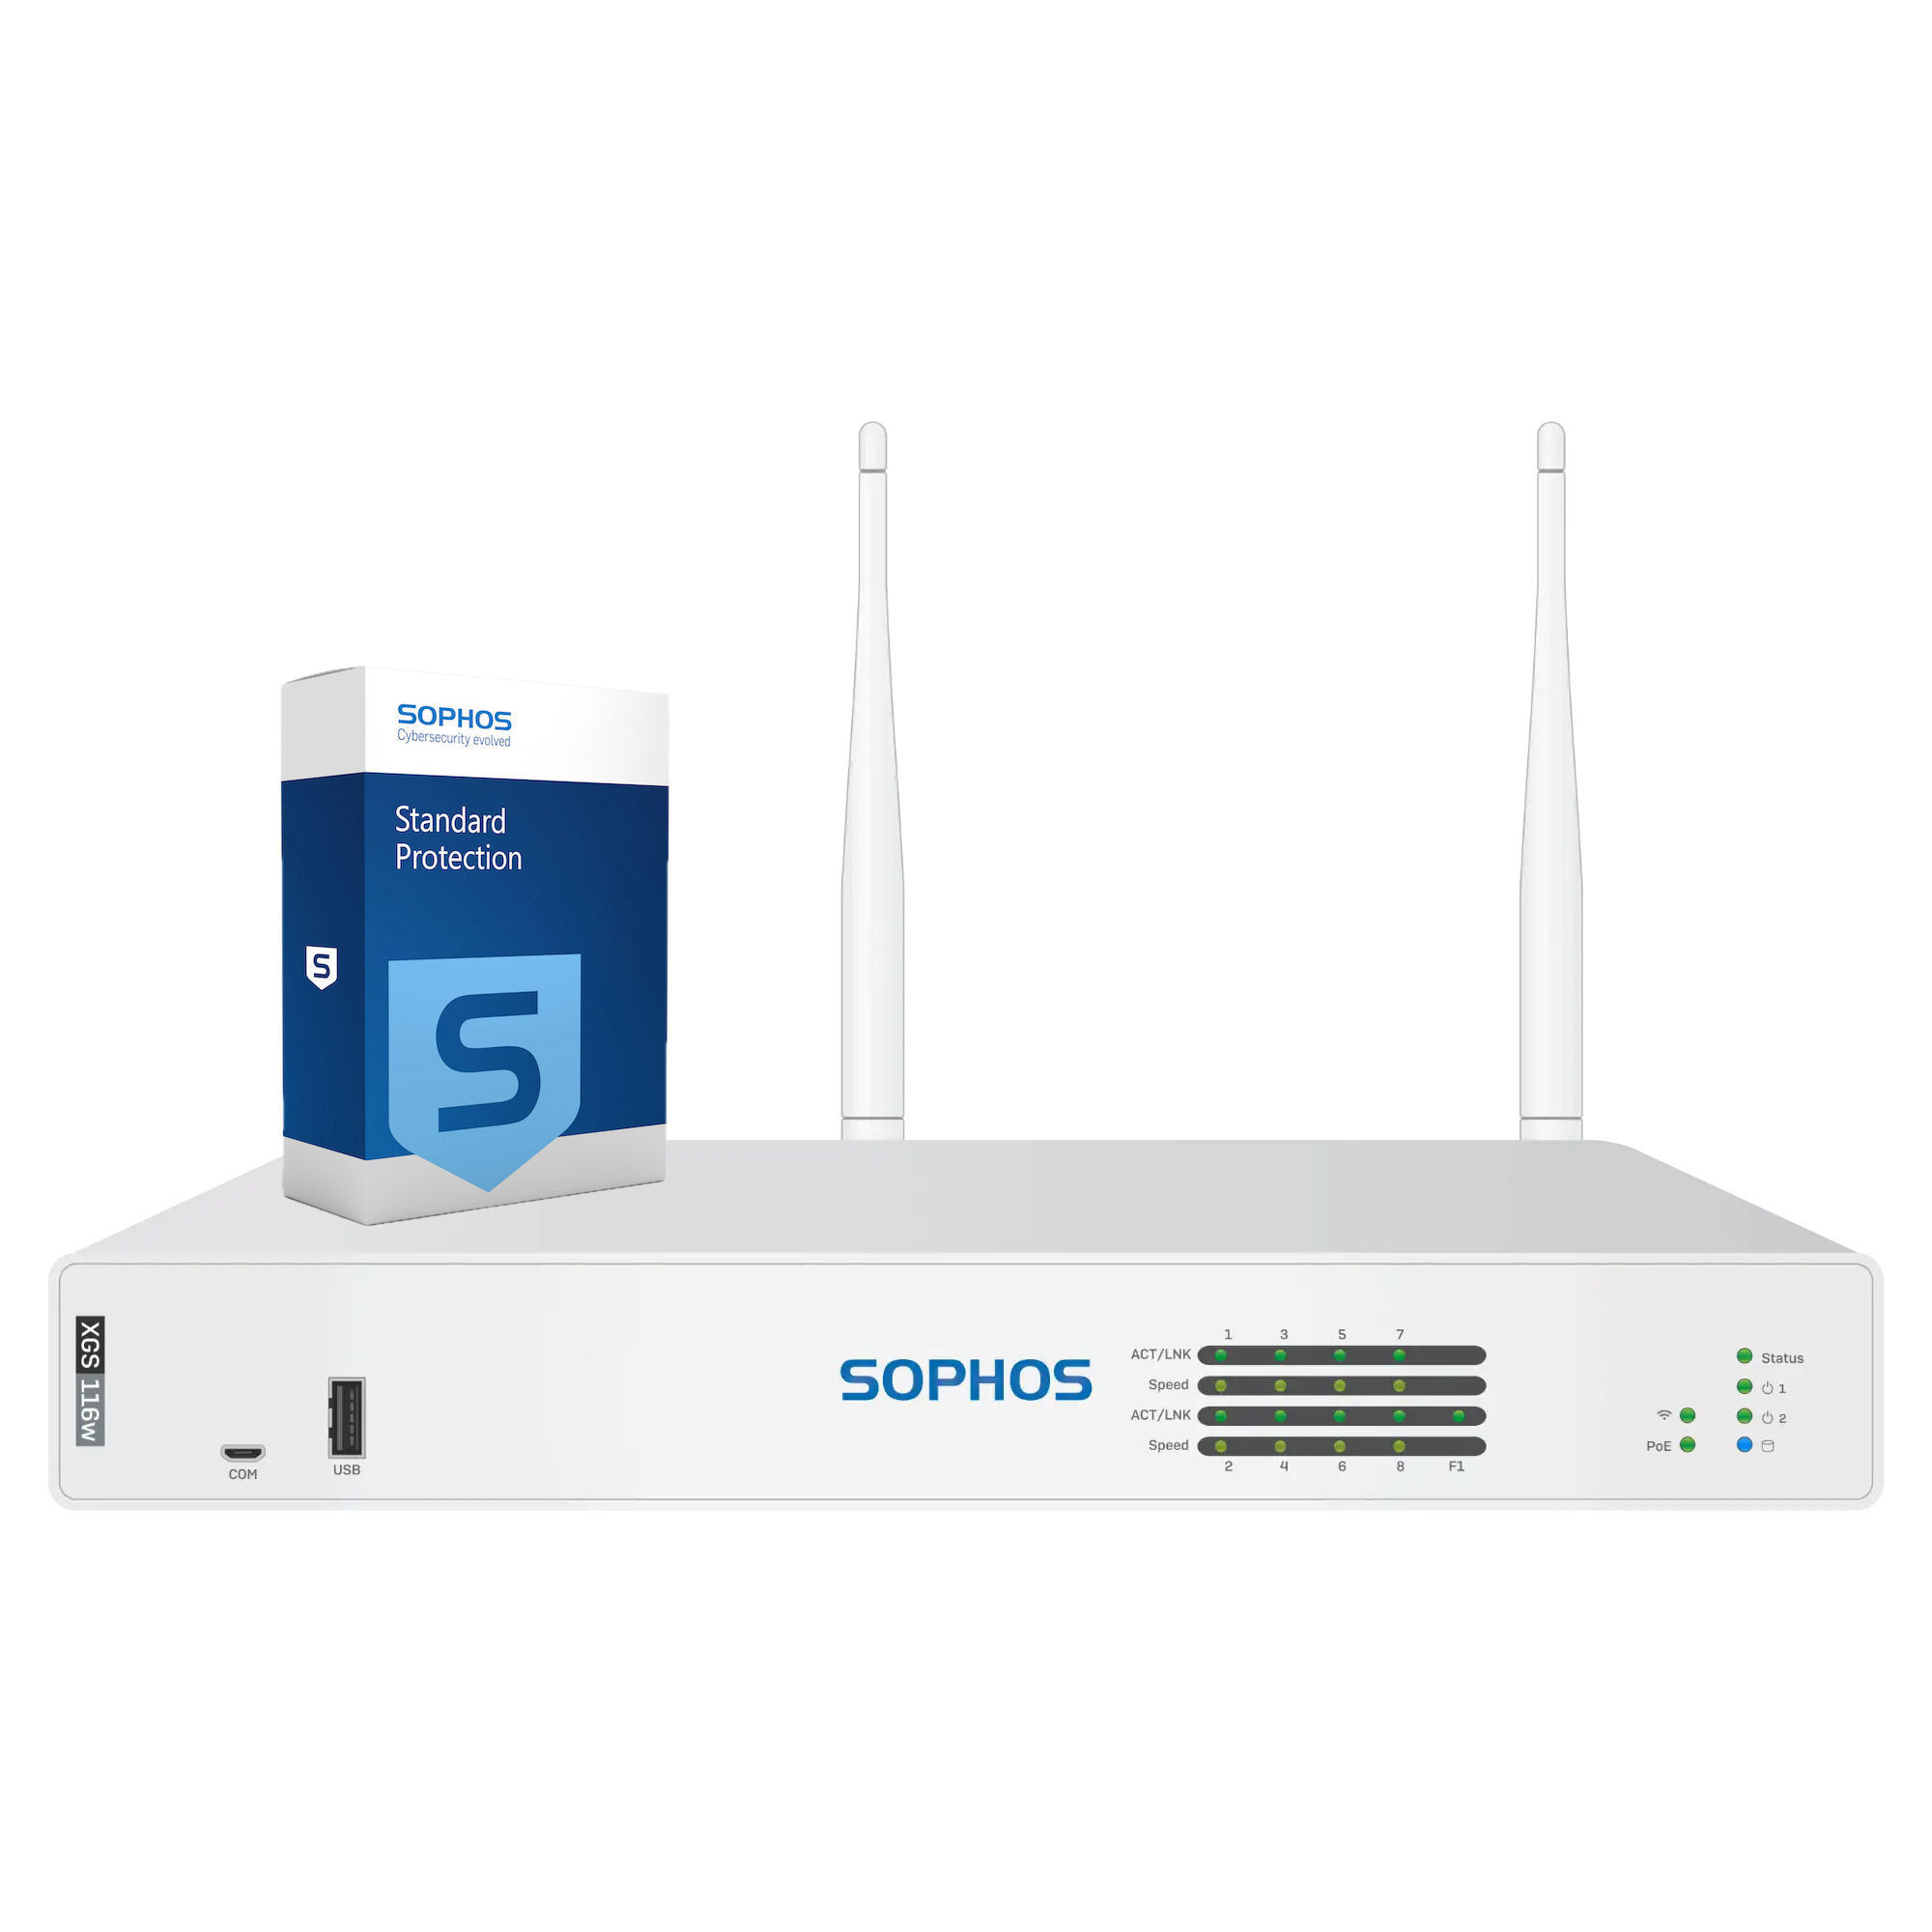 Sophos XGS 116w Firewall with Standard Protection, 3-year - EU power cord